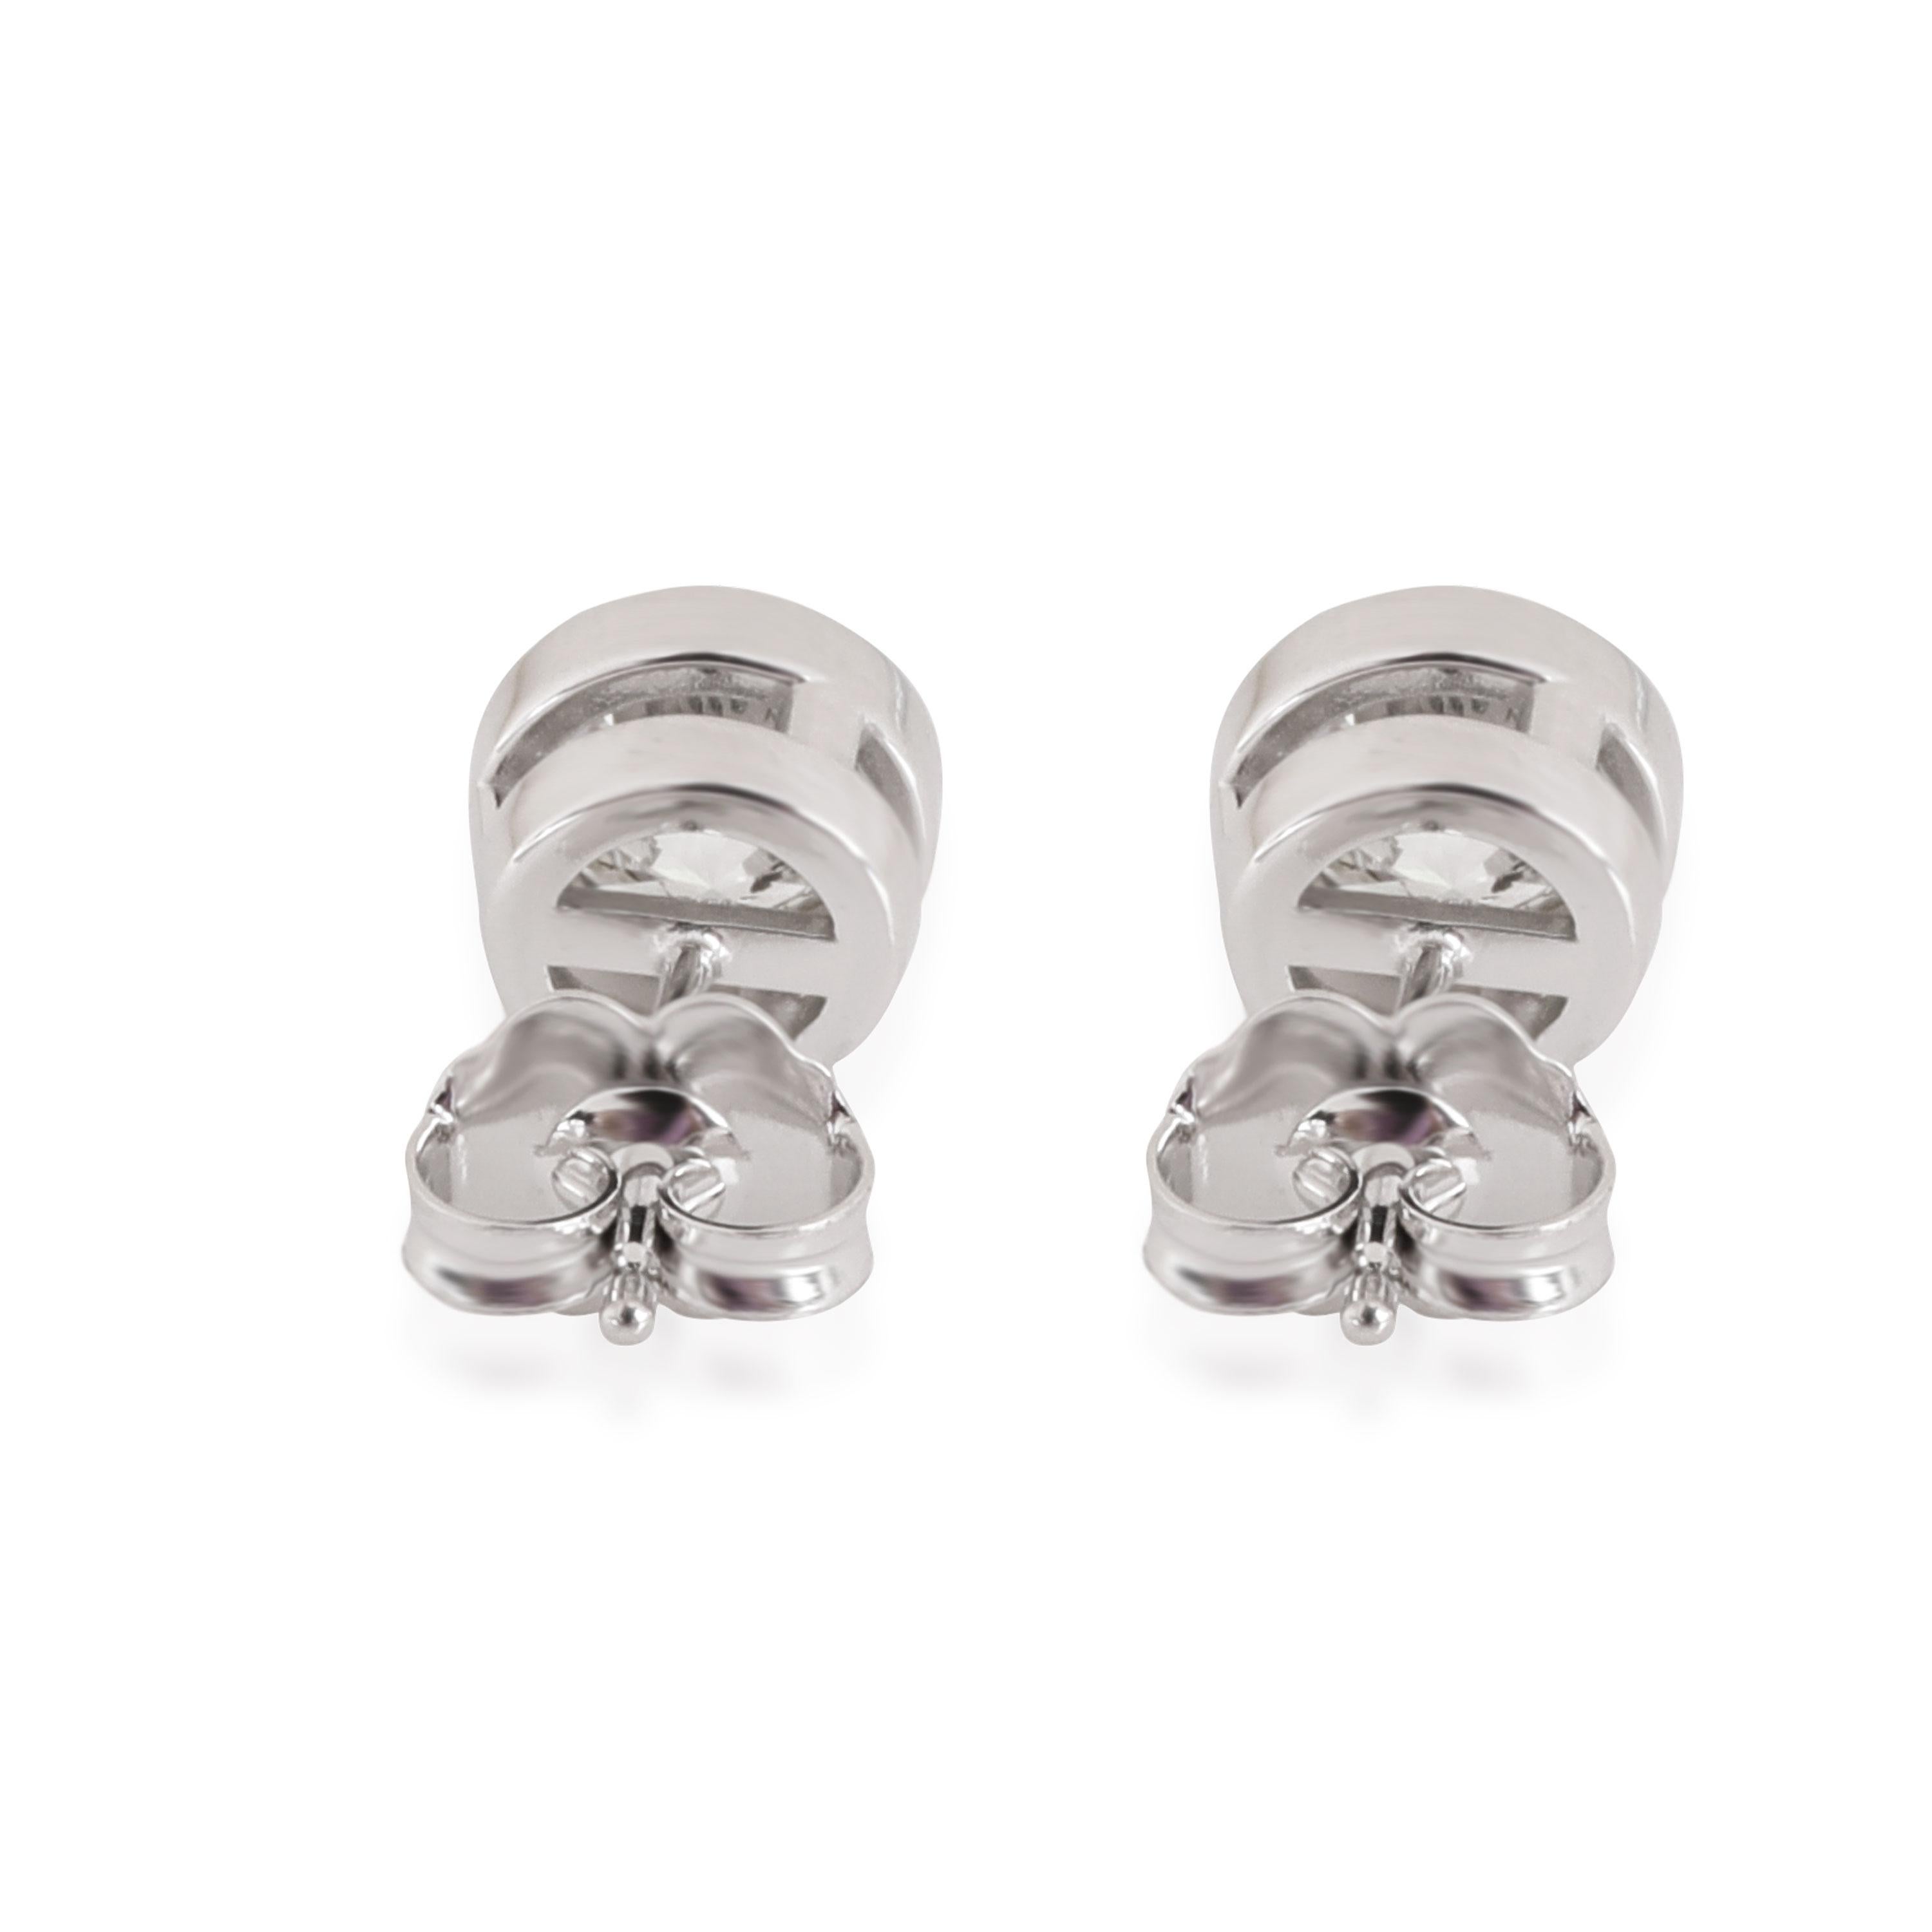 Bezel Diamond Stud Earring in 14kt White Gold F SI2 1.4 CTW

PRIMARY DETAILS
SKU: 114065
Listing Title: Bezel Diamond Stud Earring in 14kt White Gold F SI2 1.4 CTW
Condition Description: Retails for 3995 USD. In excellent condition and recently